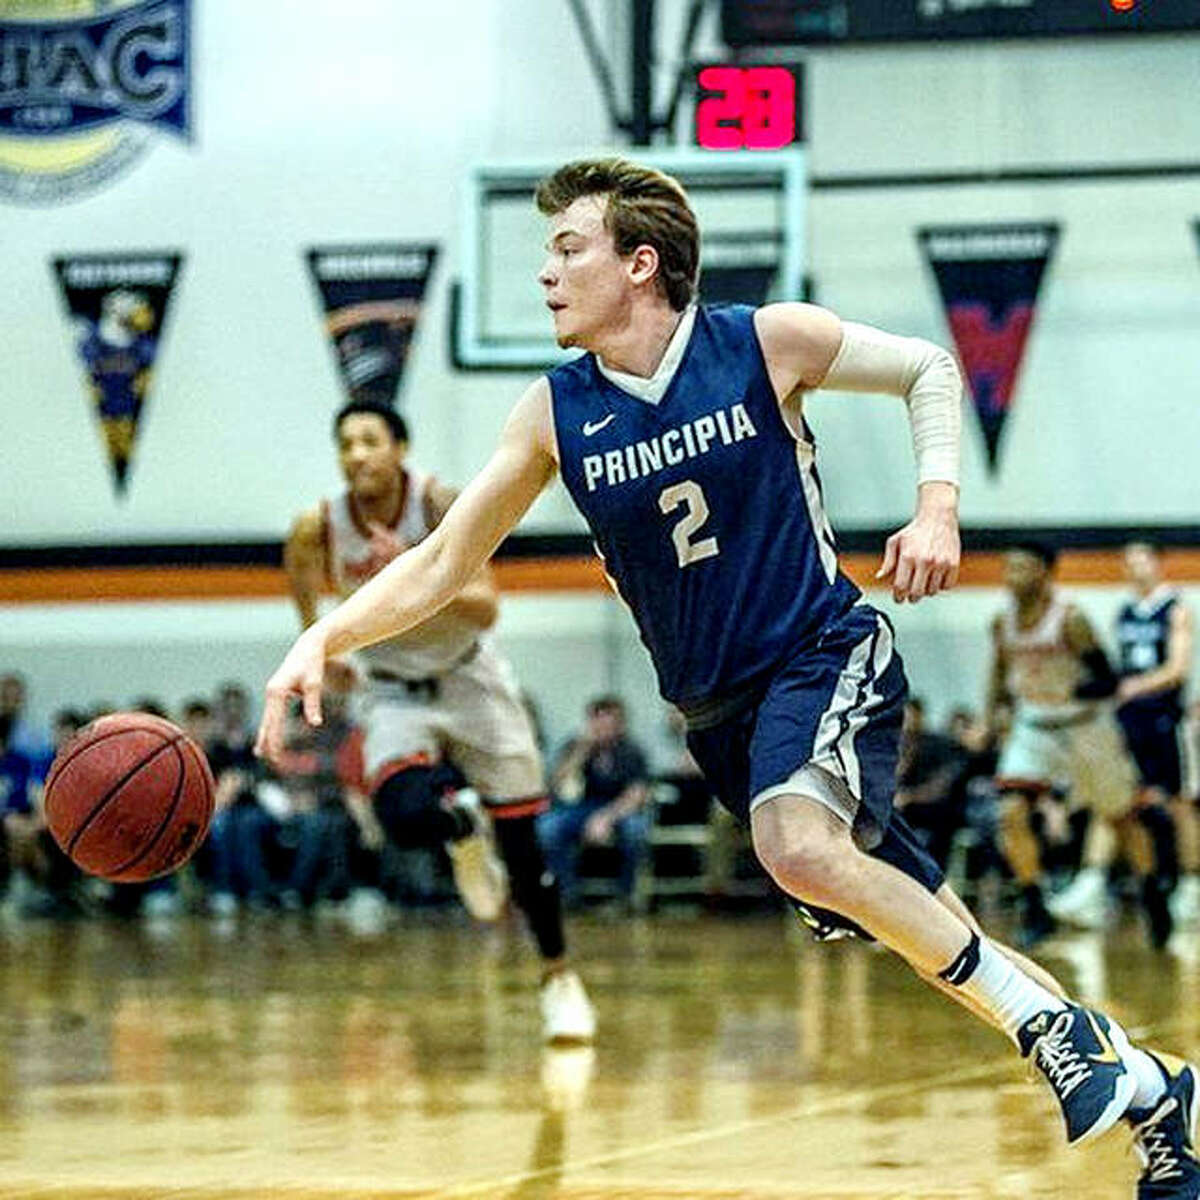 Principia College’s Micah Paulson has been named to the All-St. Louis Intercollegiate Athletic Conference’s All-Decade Team for the period from 2010-2019. He earned All-SLIAC honors three times during his career including a first team nod as a senior when he was the SLIAC Player of the Year.